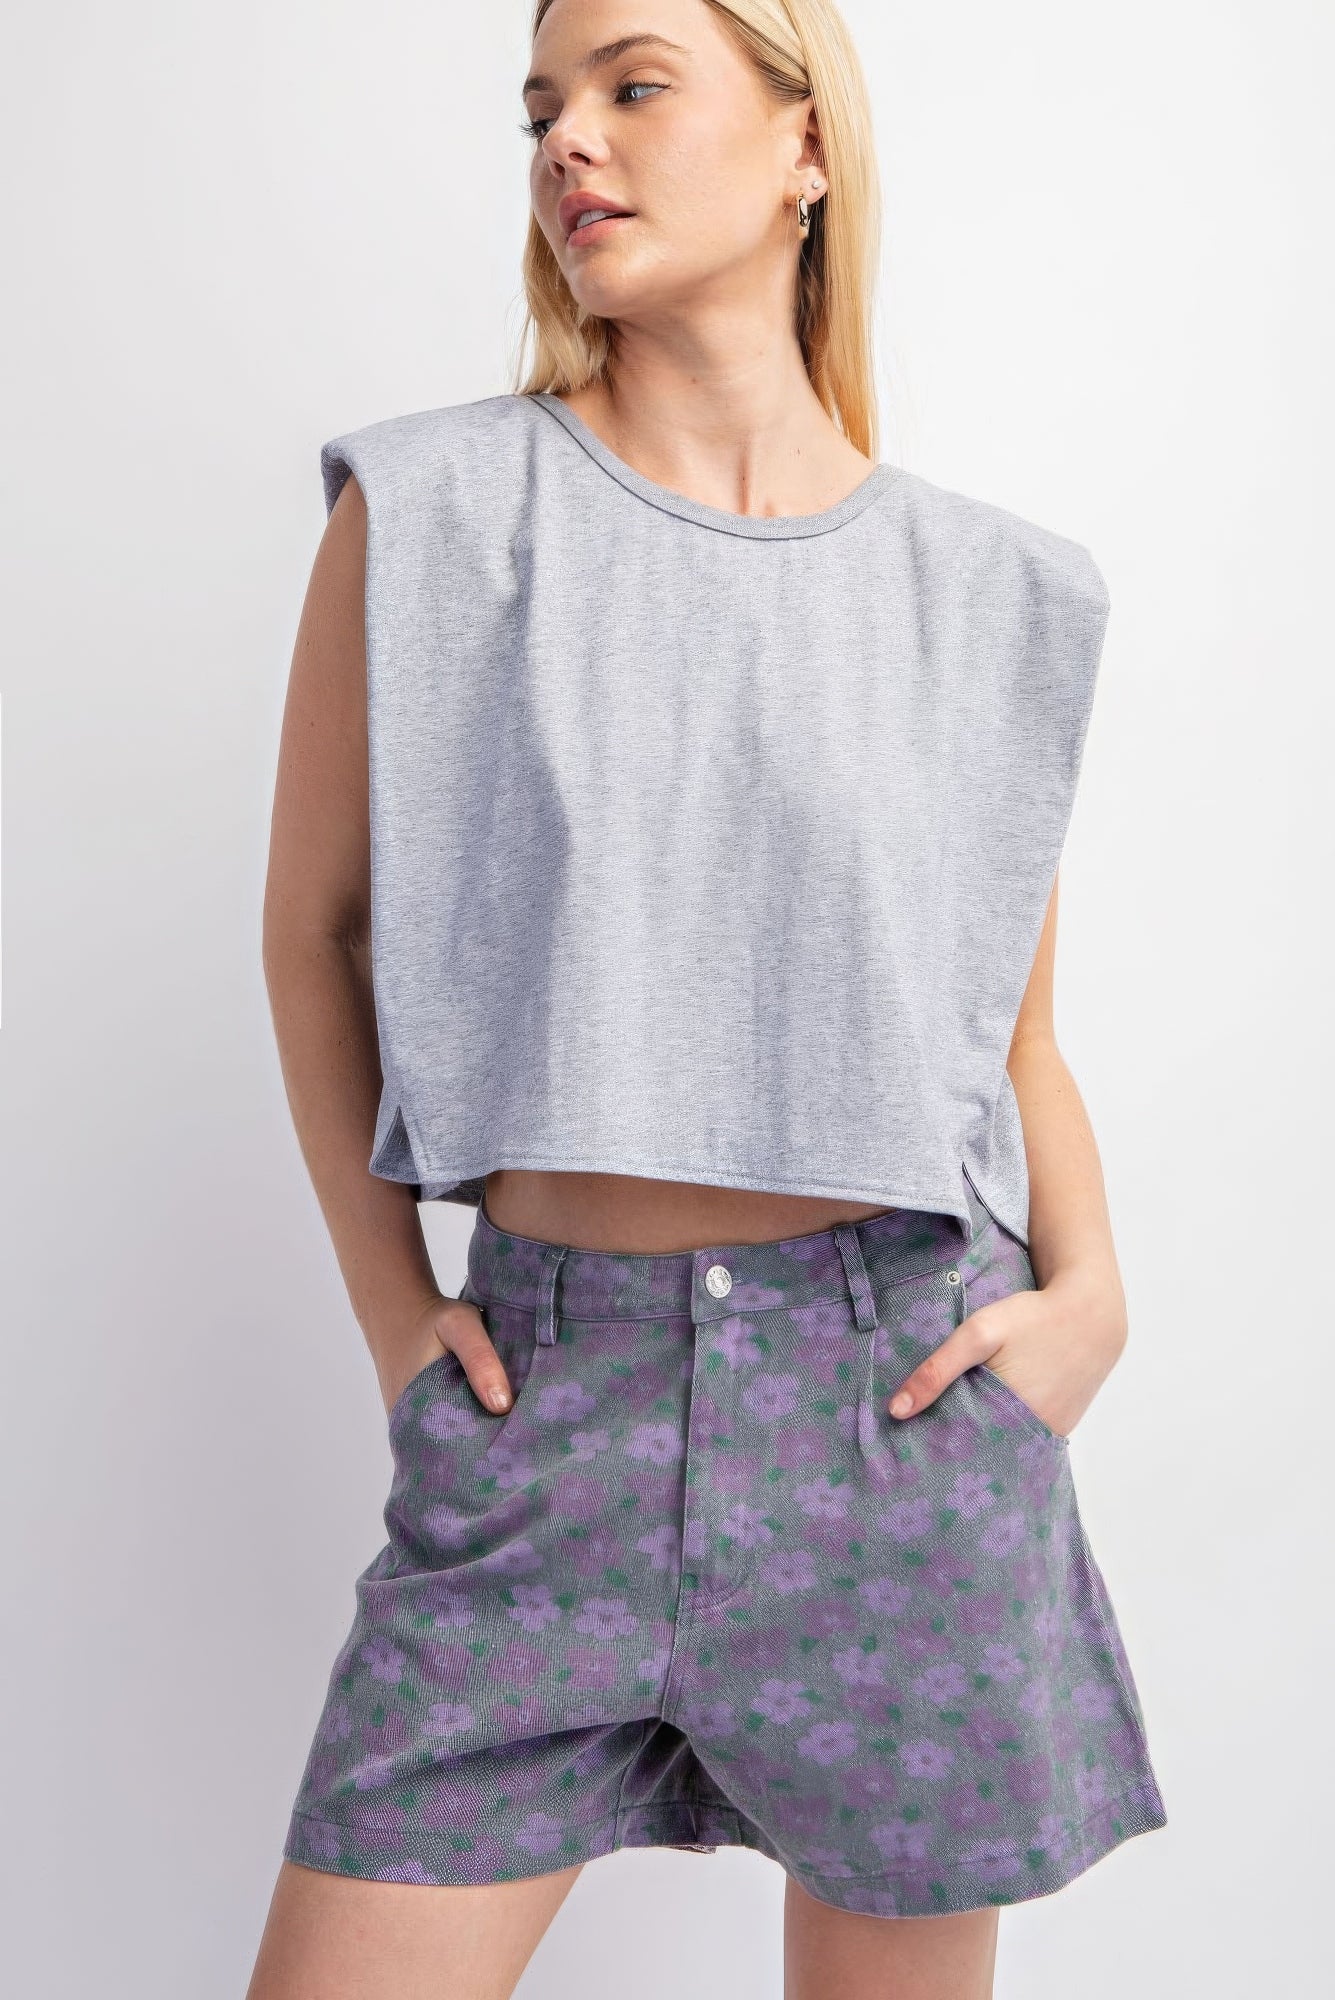 THE ROCHELLE Sleeveless Crop Top With Shoulder Pads